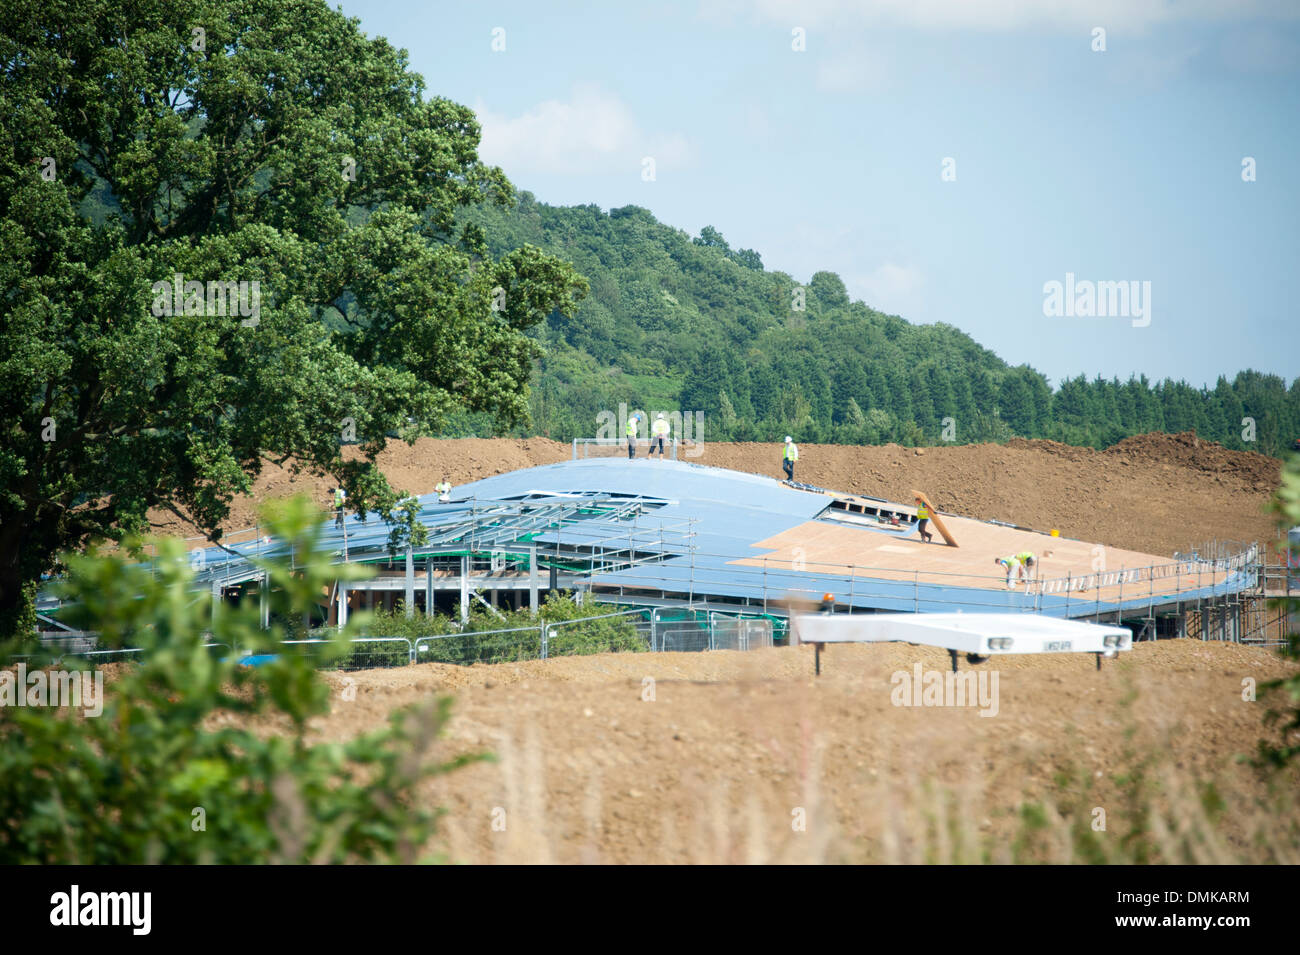 New Motorway Services Roof Under Construction Stock Photo